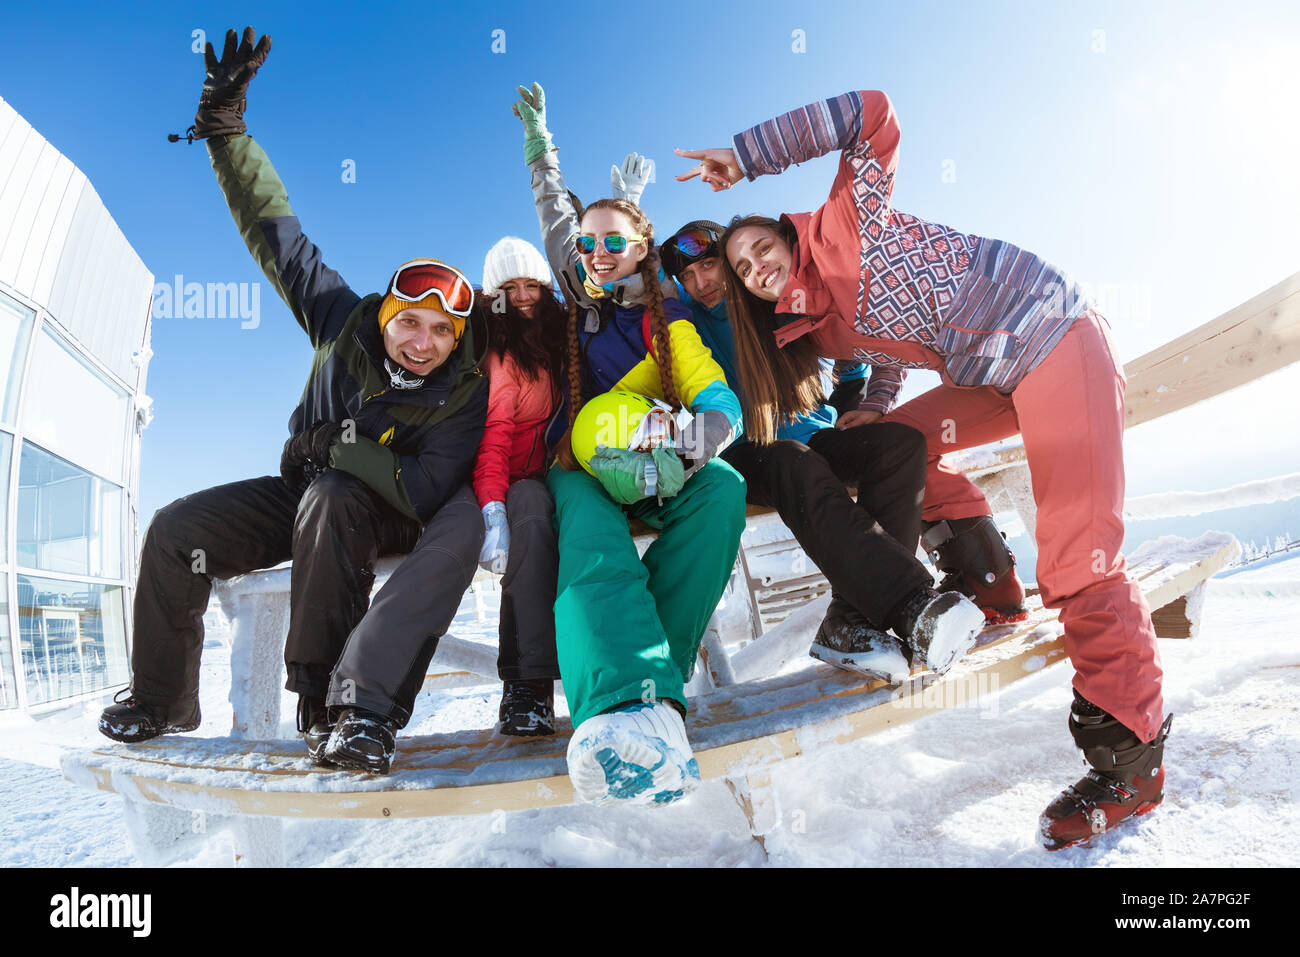 Five happy friends skiers and snowboarders are having fun and posing together at ski resort Stock Photo